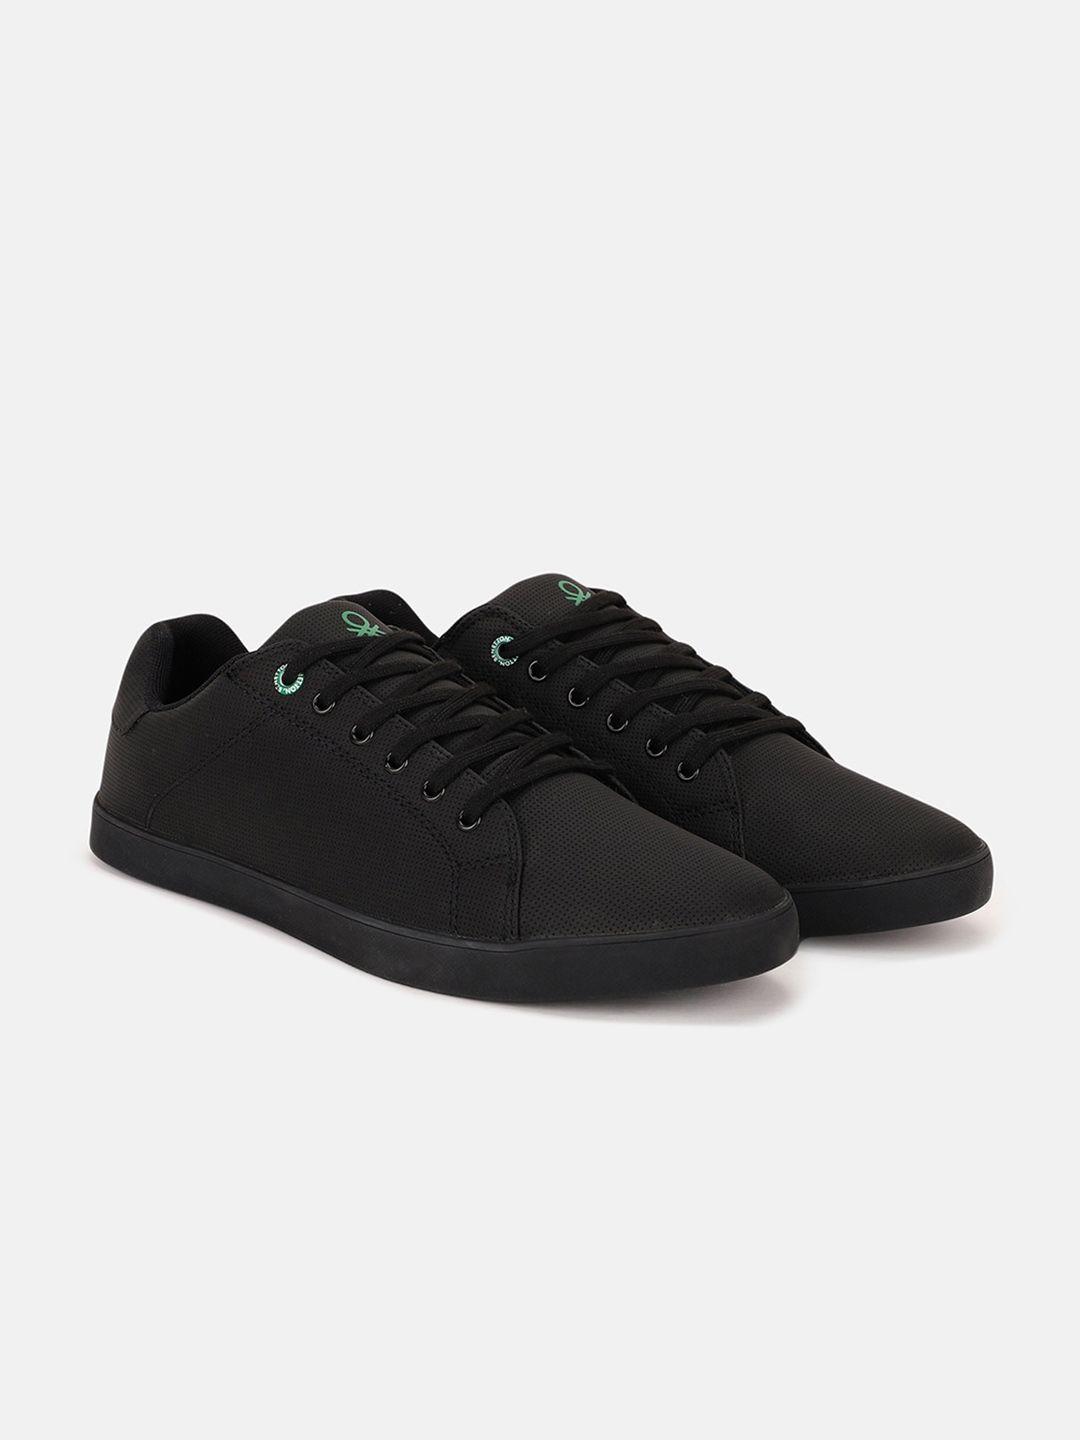 united colors of benetton men perforated lace-up sneakers